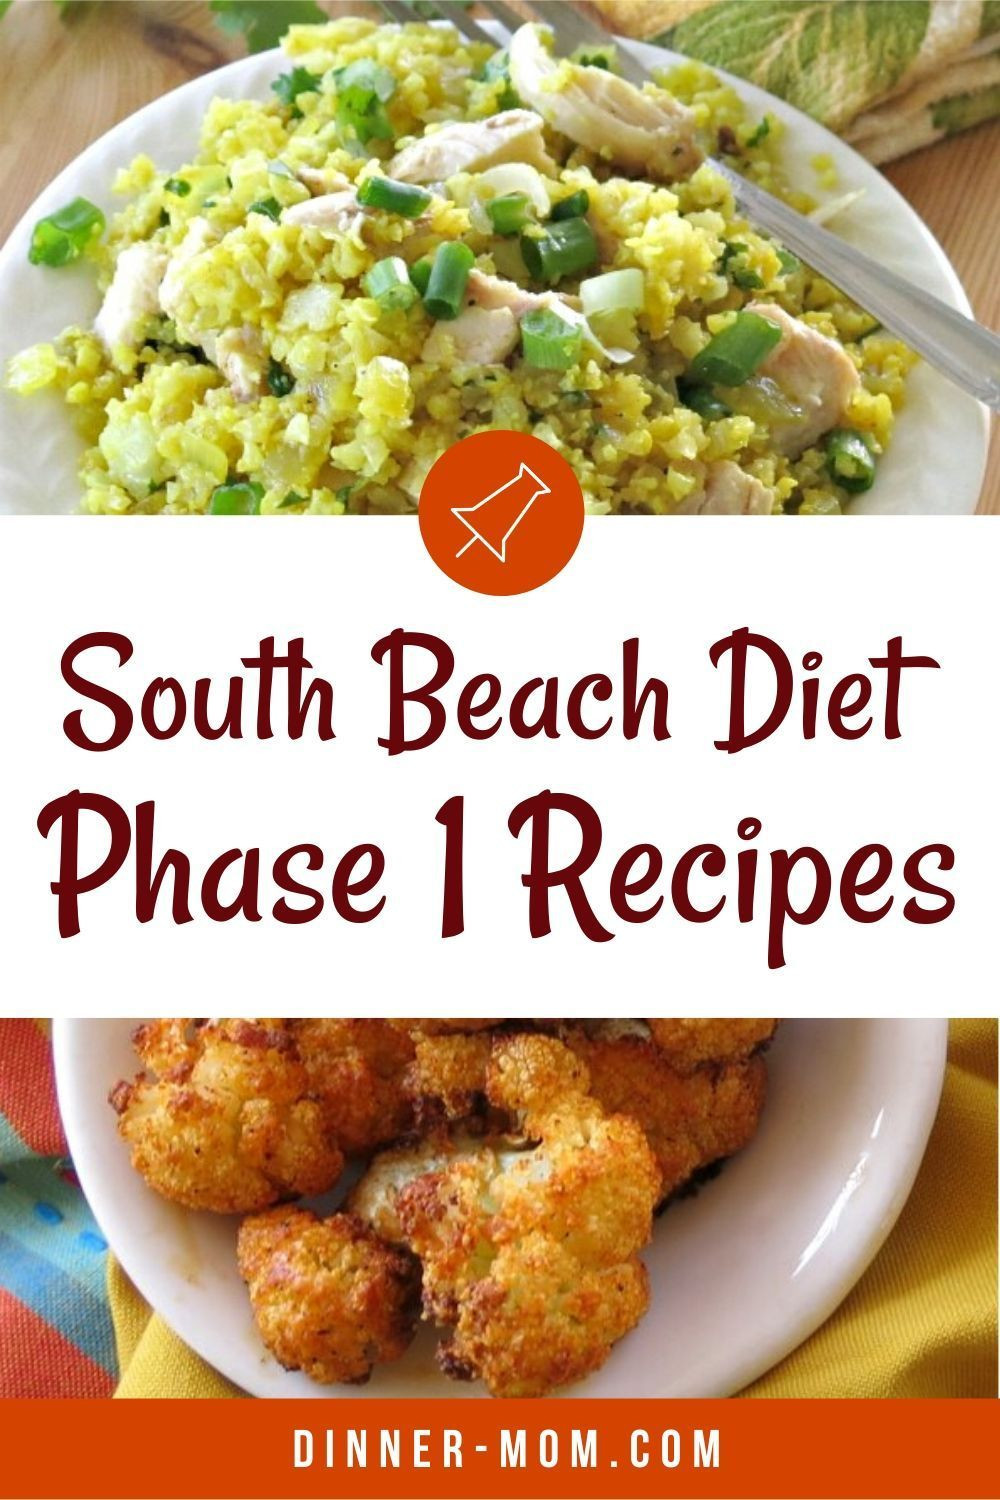 South Beach Keto Diet Recipes
 These South Beach Diet Phase 1 Recipes are perfect for low